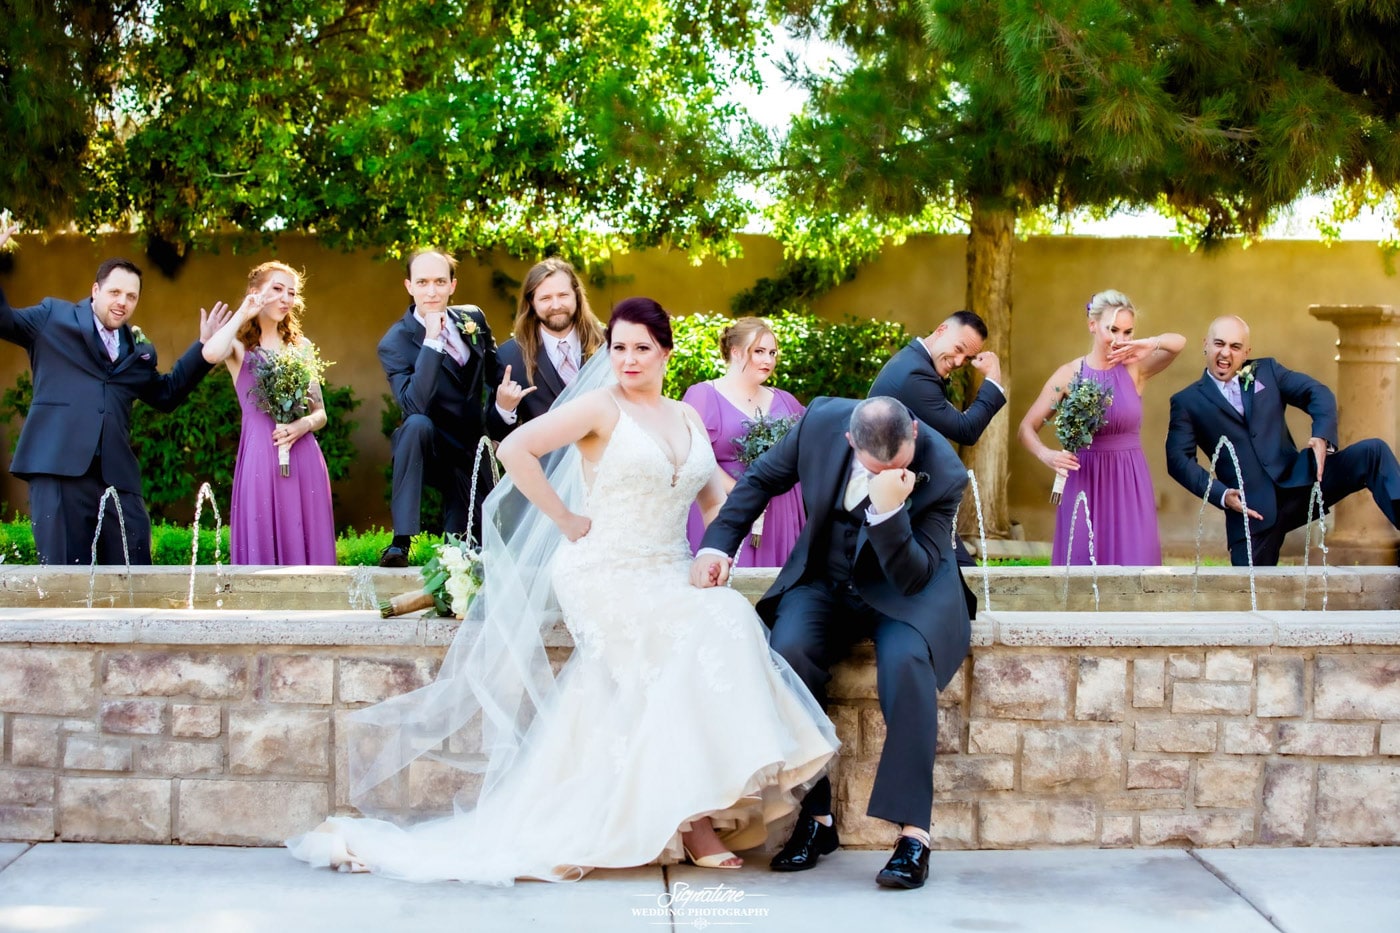 Bride and groom with wedding party funny poses